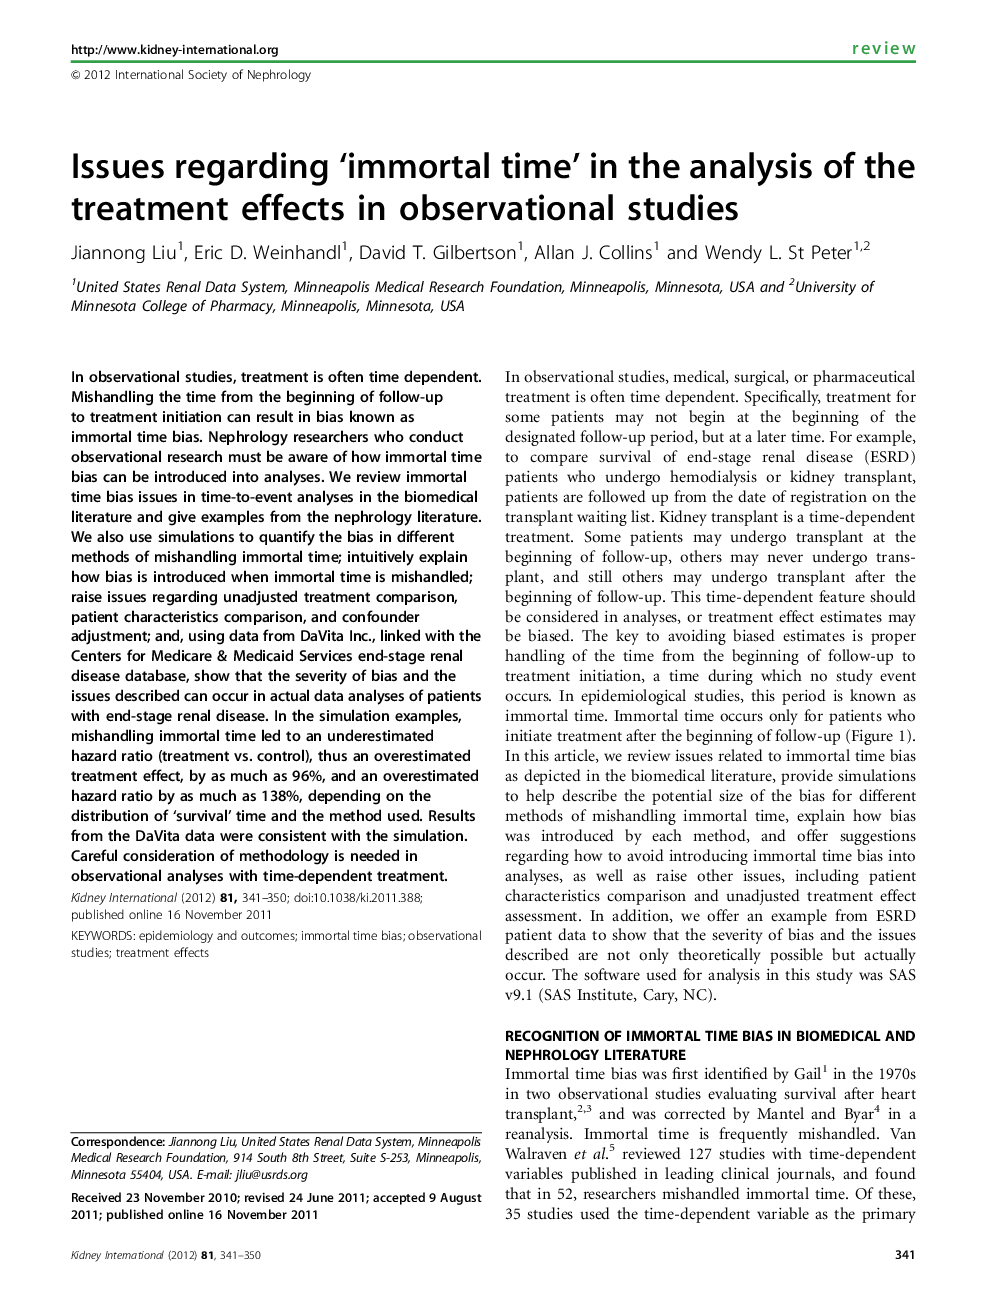 Issues regarding ‘immortal time’ in the analysis of the treatment effects in observational studies 